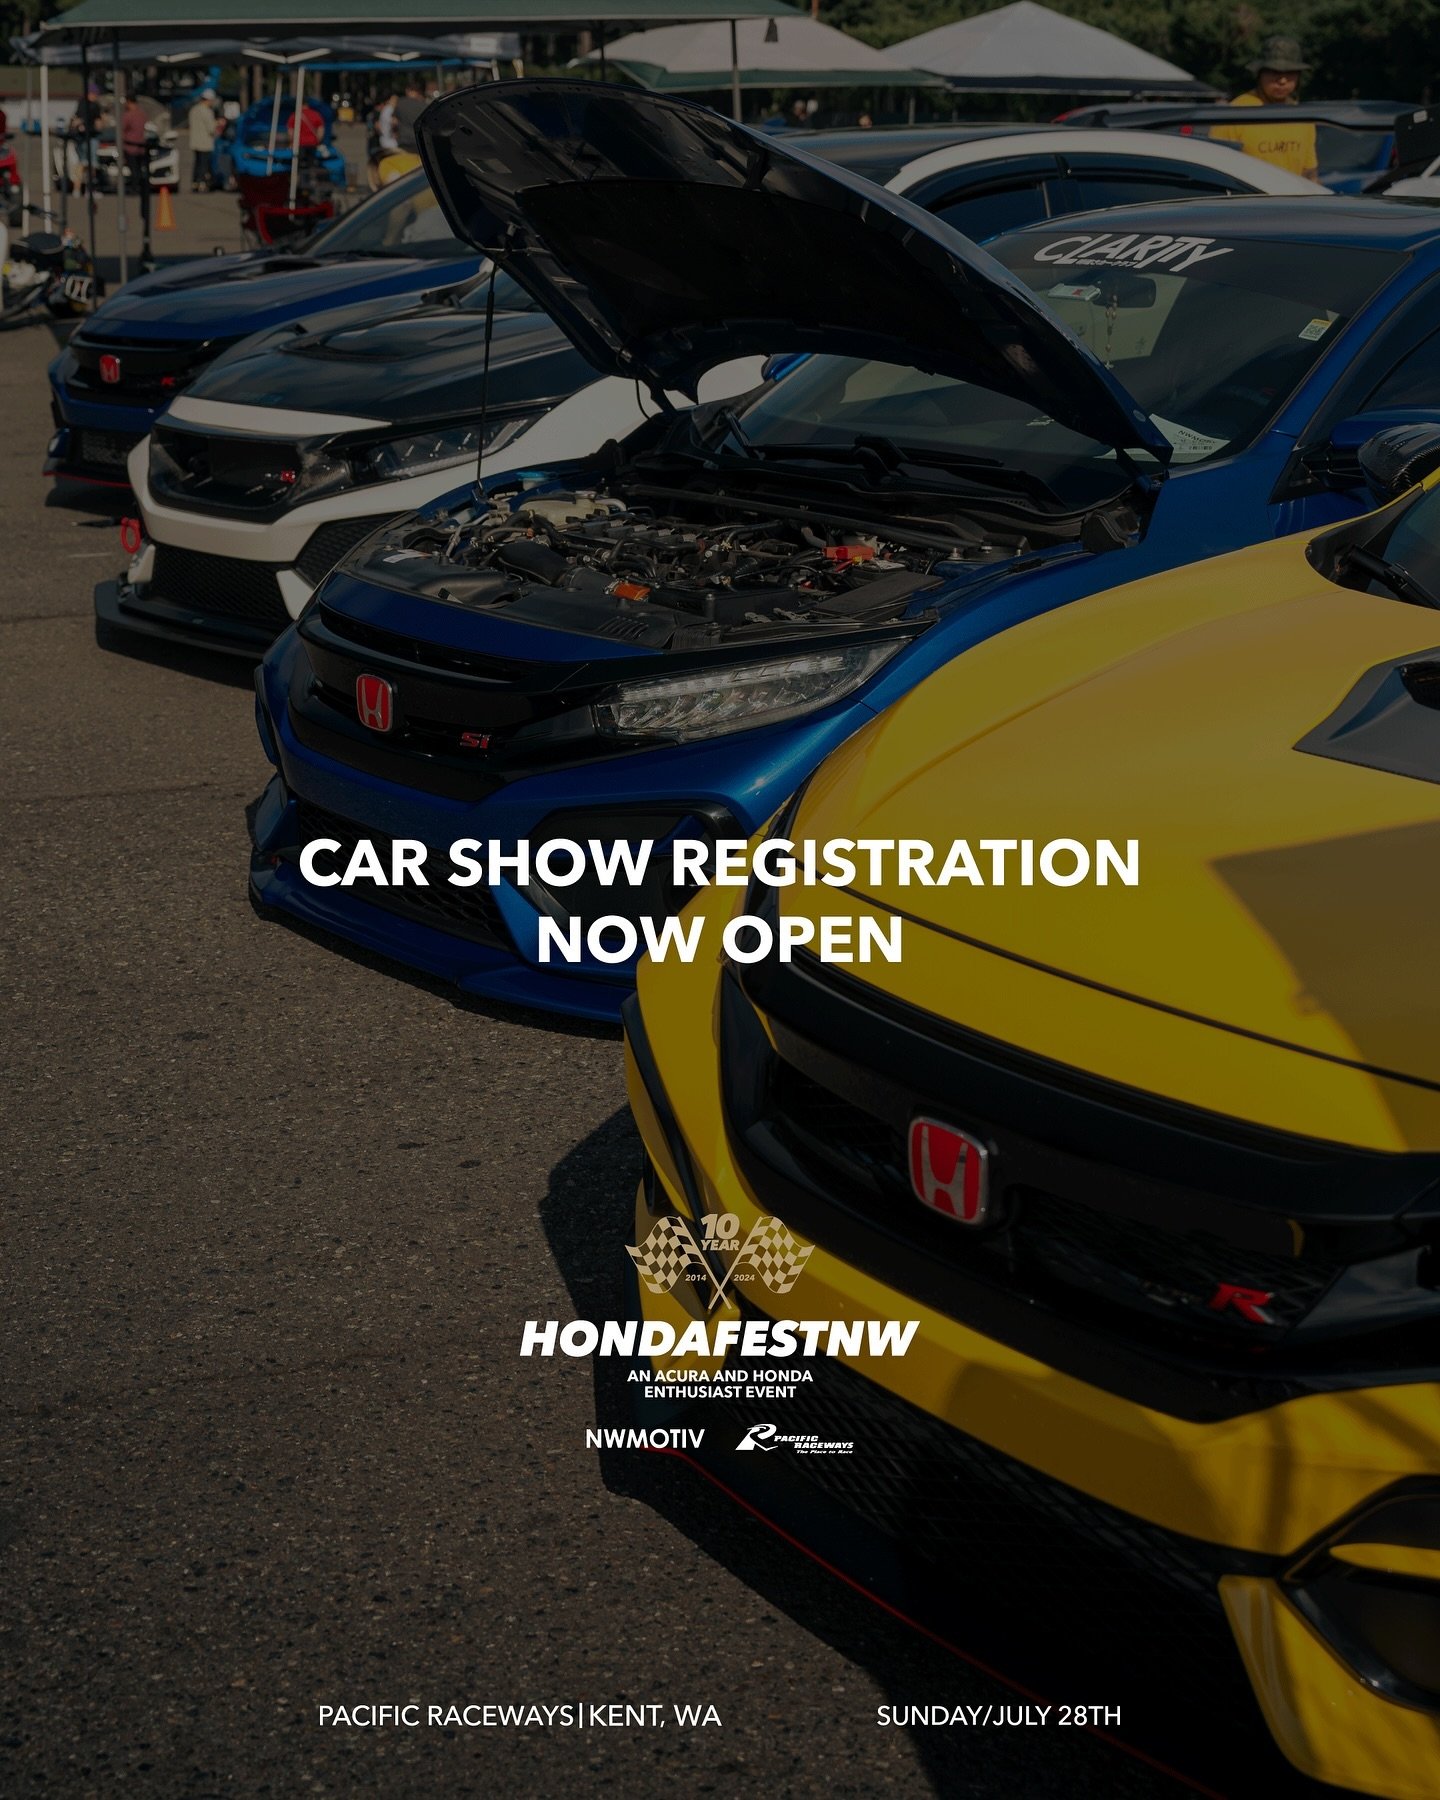 Car show registration for @hondafestnw is now open! Secure your spot to be a part of our 10 year celebration! Spread the word to your friends. Let&rsquo;s make this HondafestNW the biggest it has ever been! 

Tap the link in our bio to register!